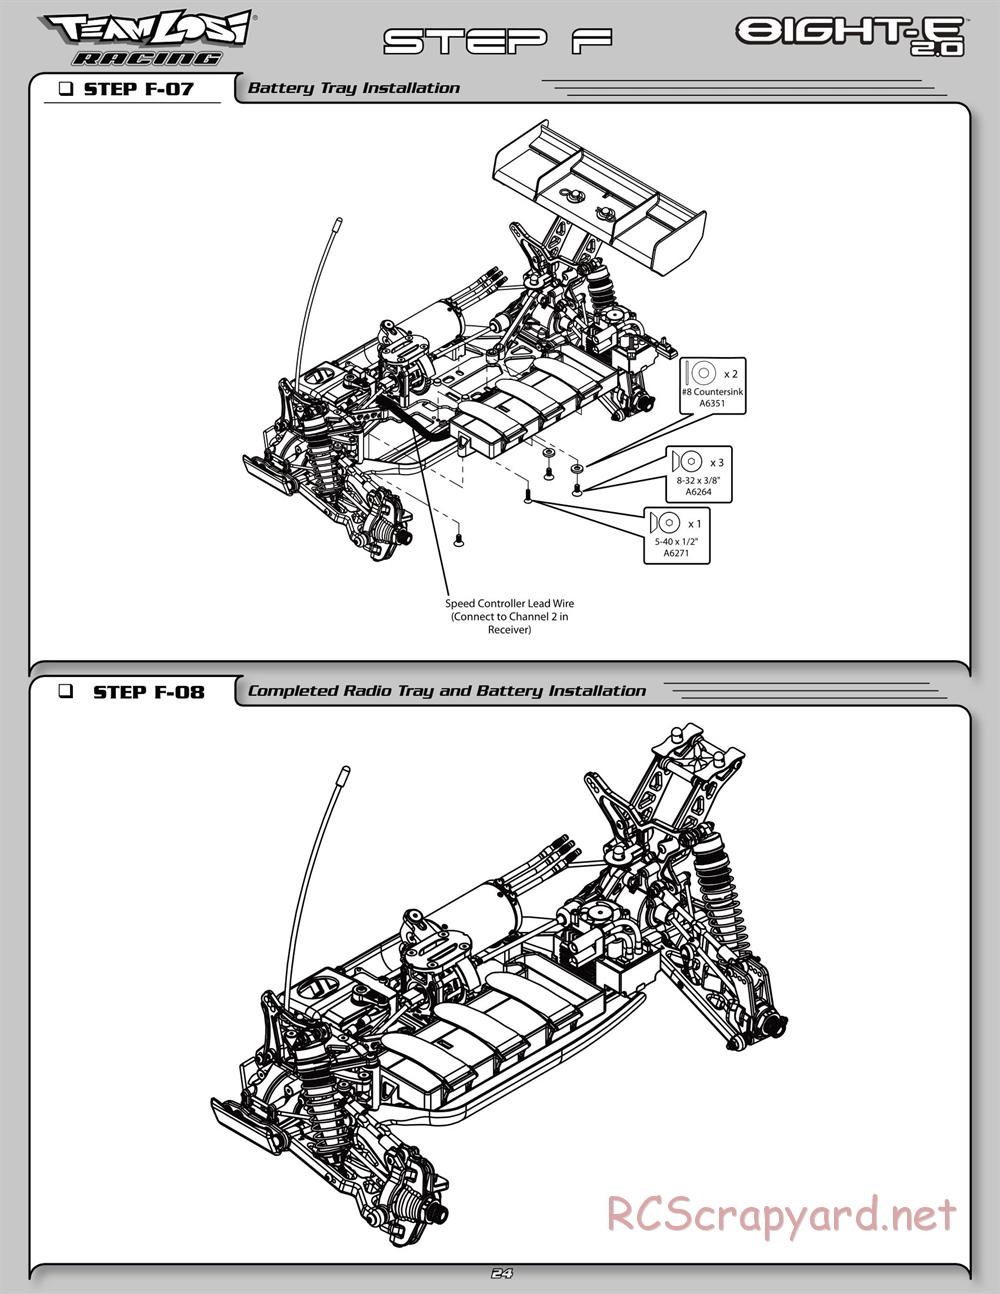 Team Losi - 8ight-E 2.0 Race Roller - Manual - Page 31